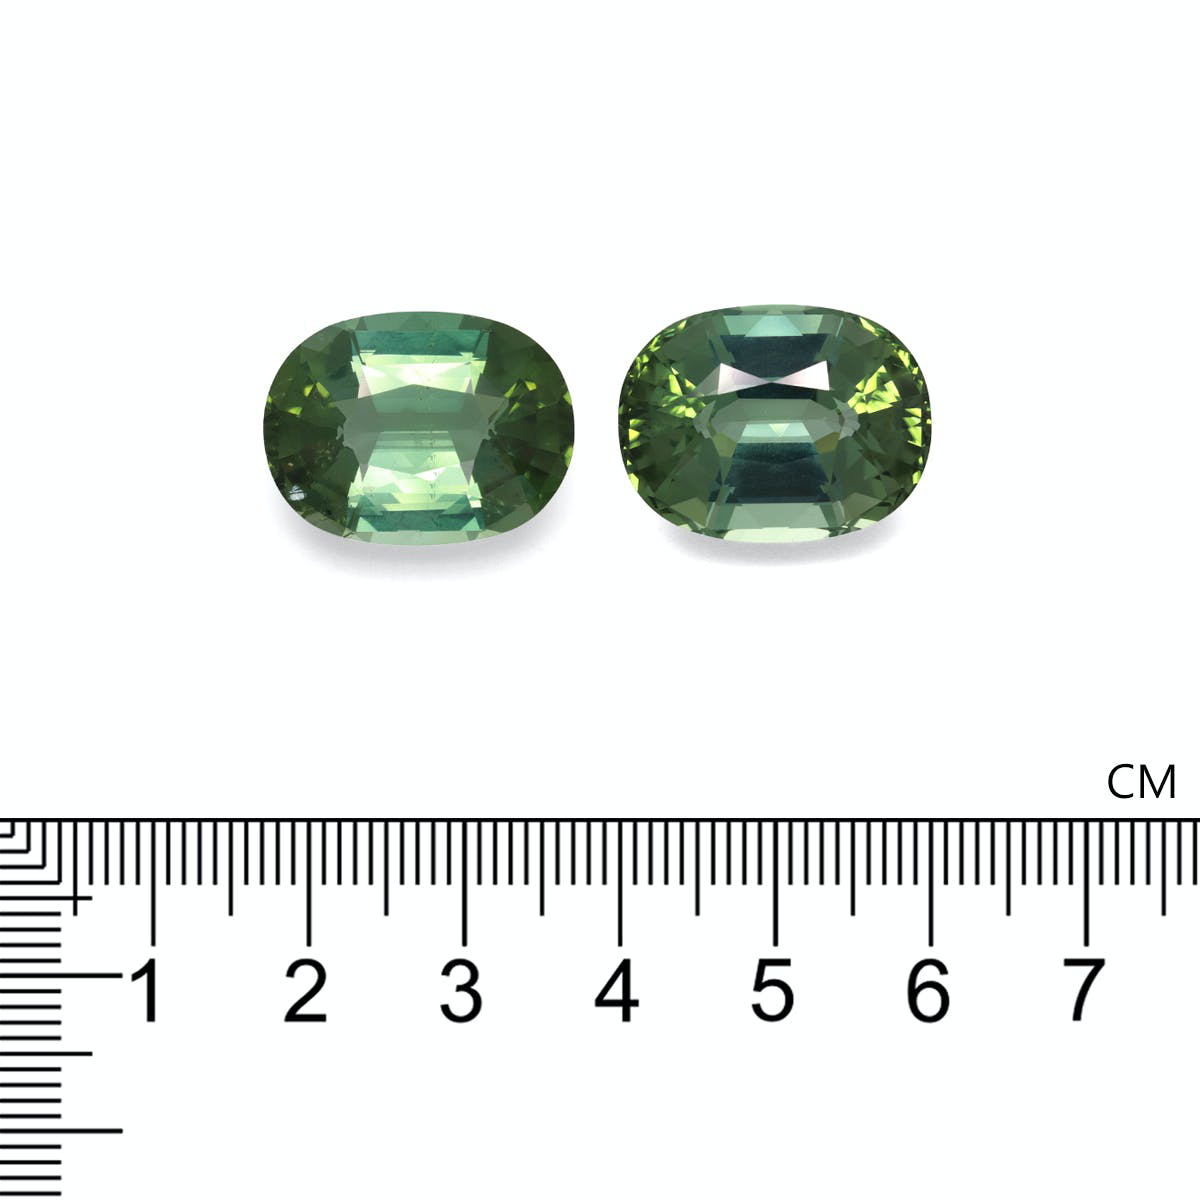 Picture of Cotton Green Tourmaline 34.59ct - Pair (TG0506)